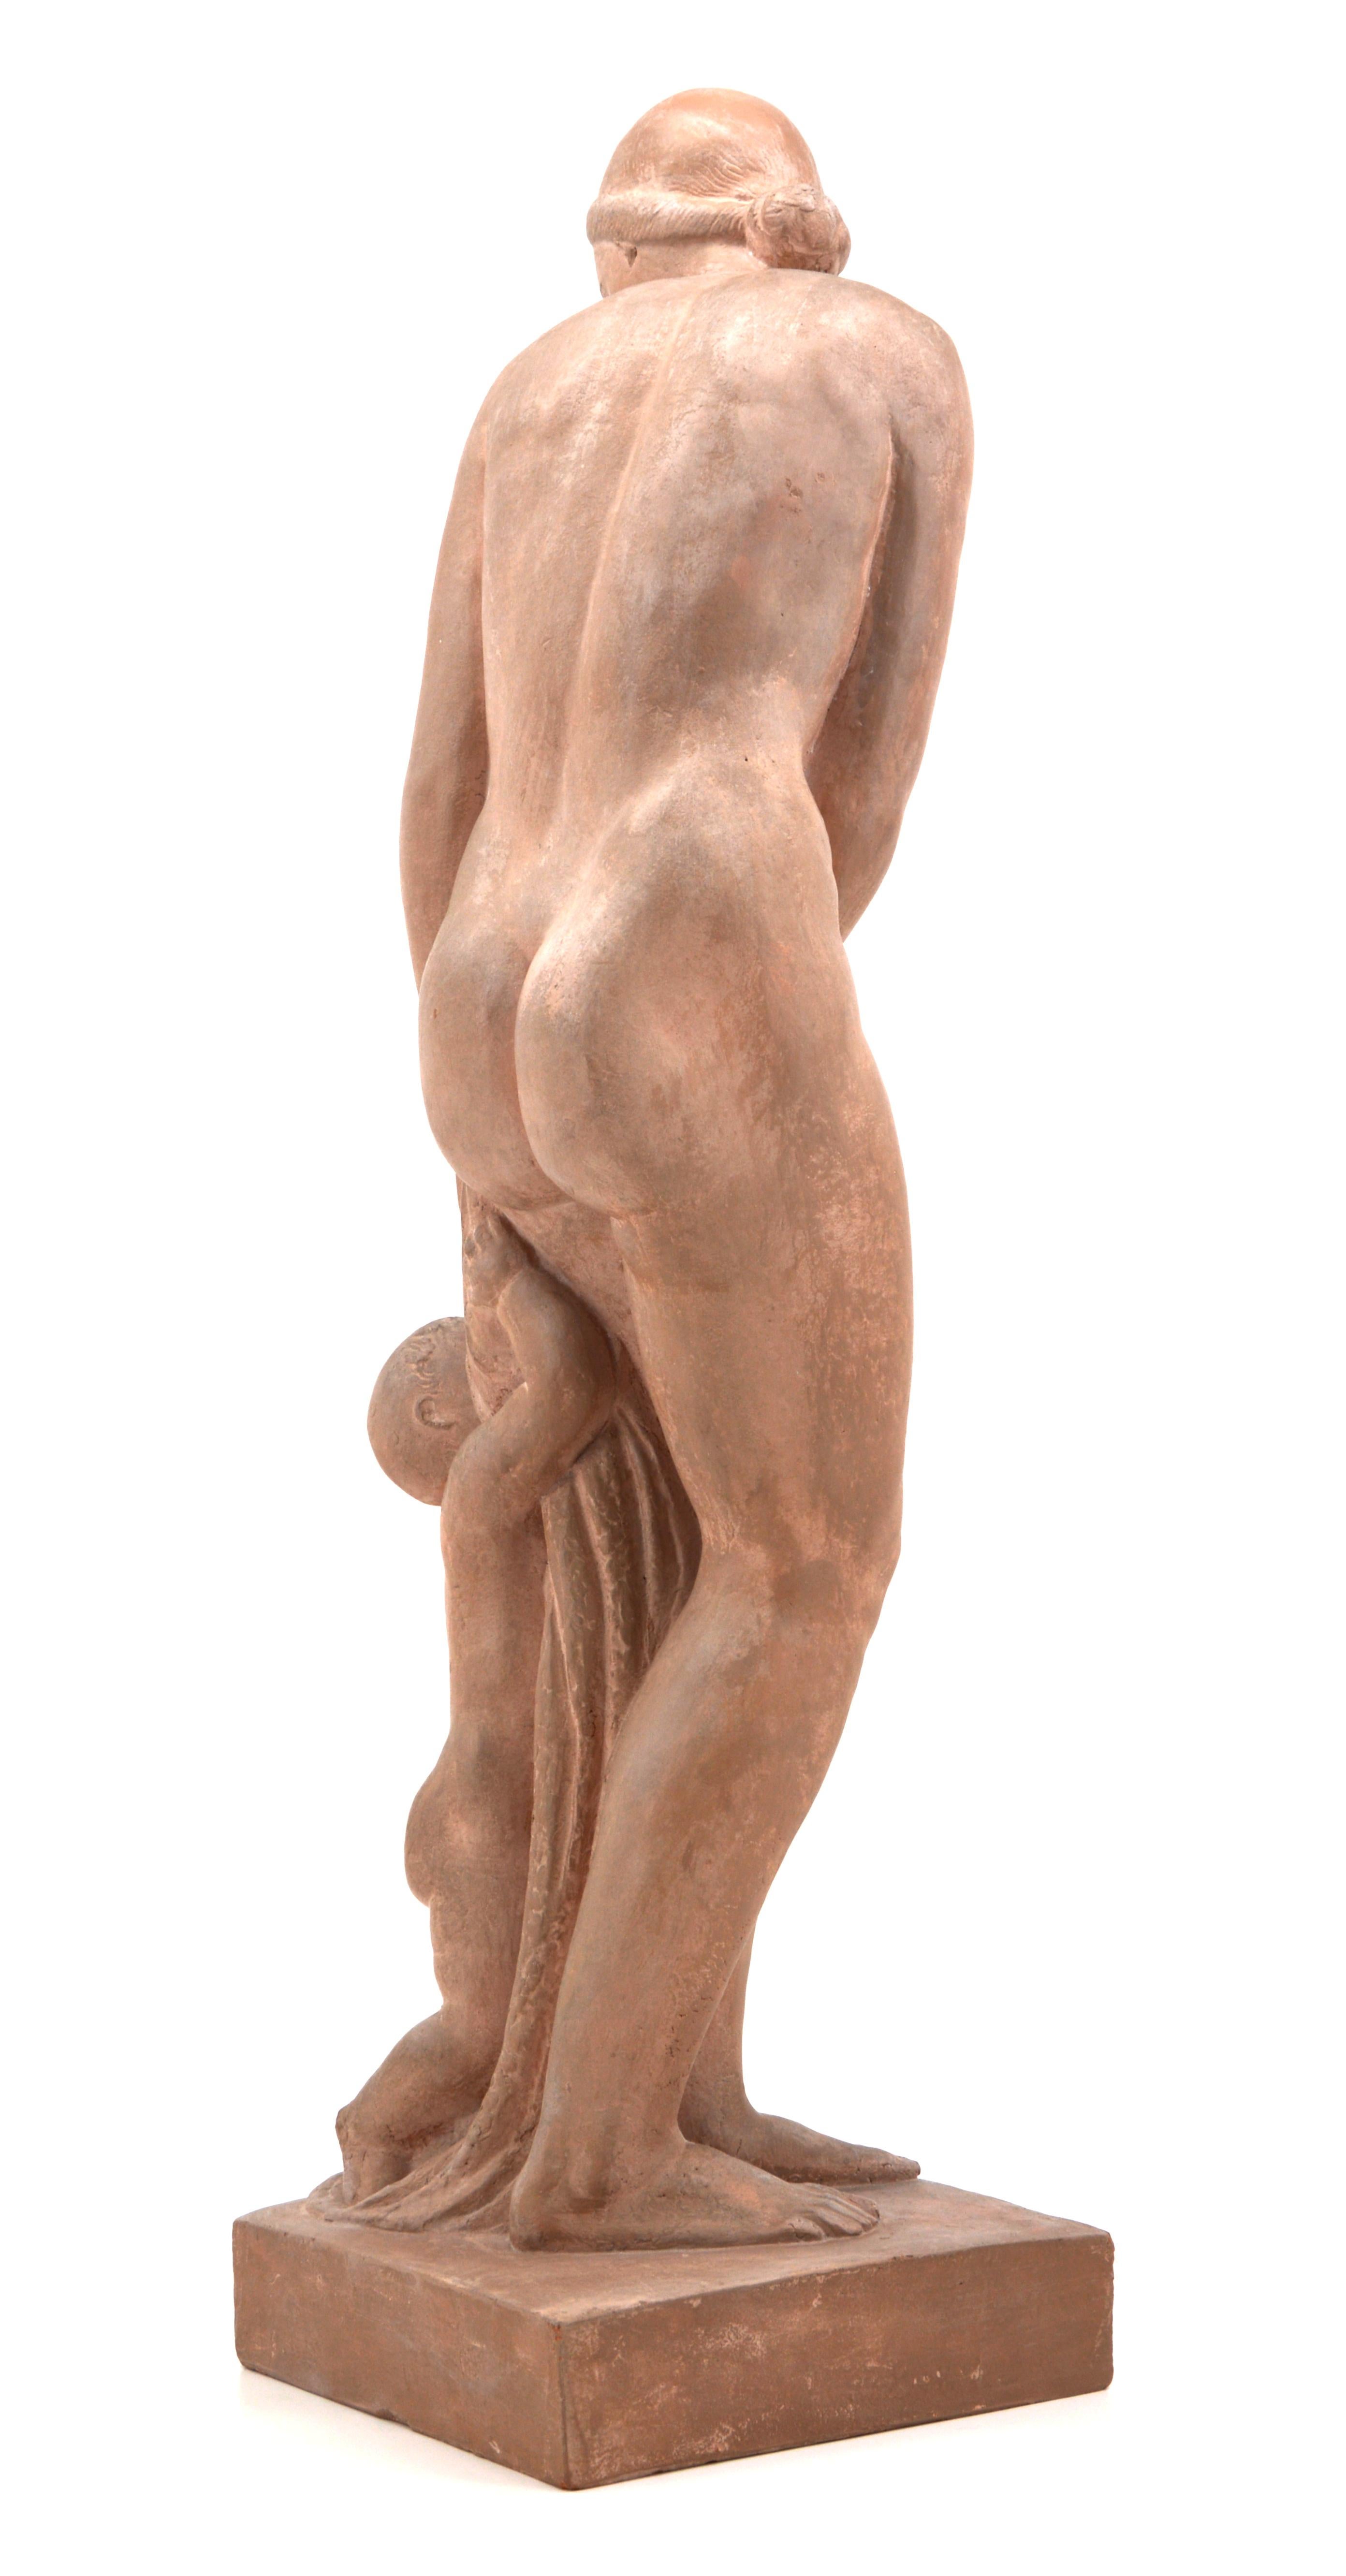 Gilbert Privat, French Art Deco Bather with Child, Terracotta Sculpture, 1920s For Sale 3